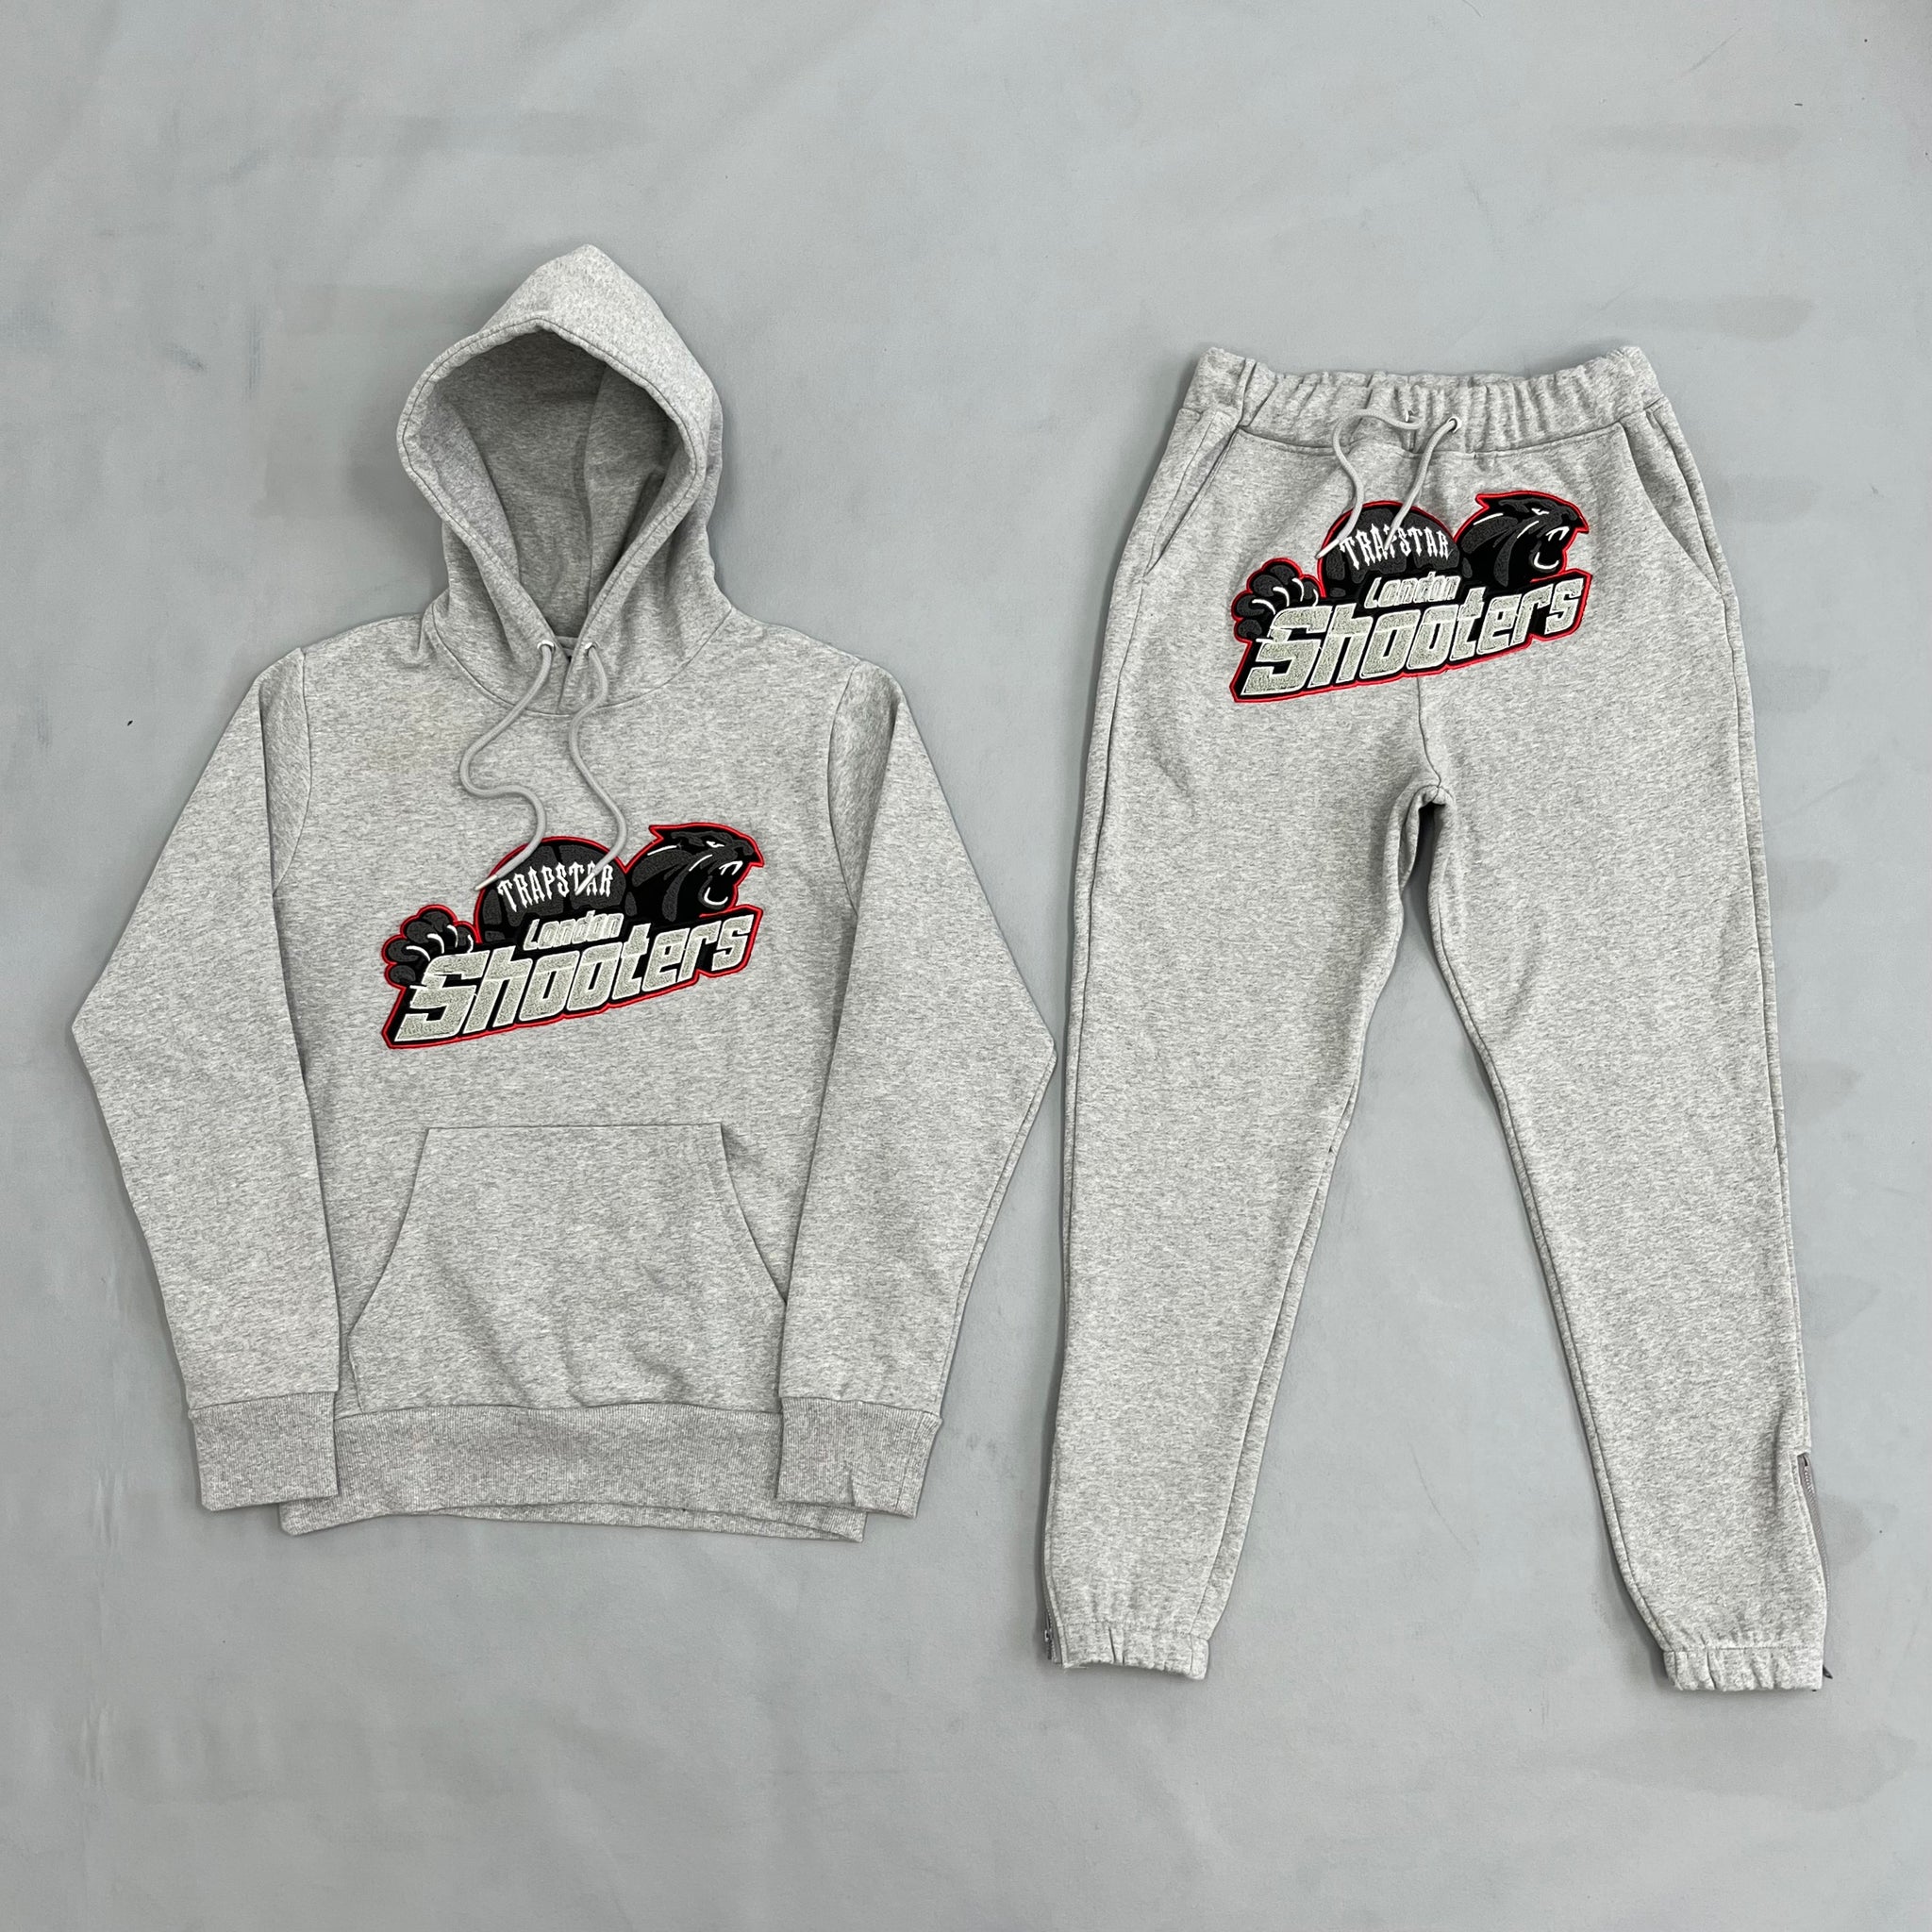 Mens Grey/Red Shooters tracksuit "TStar"